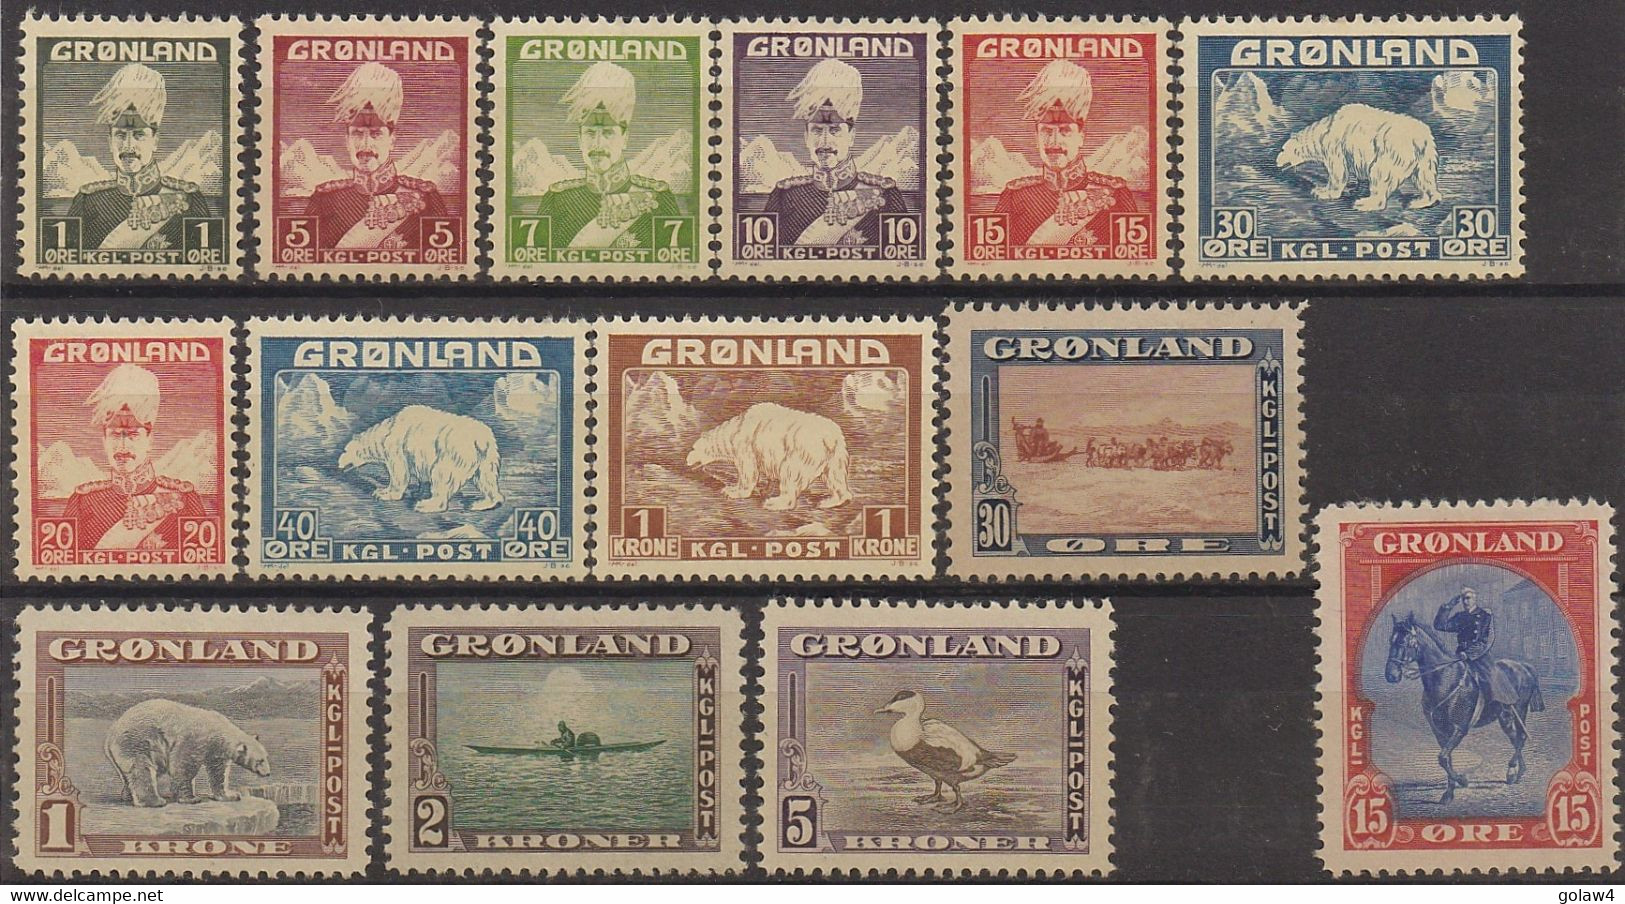 31220# GROENLAND LOT TIMBRES * Entre N° 1 & 18 * CHARNIERES PROPRES Cote 200 Euros - Collections, Lots & Séries